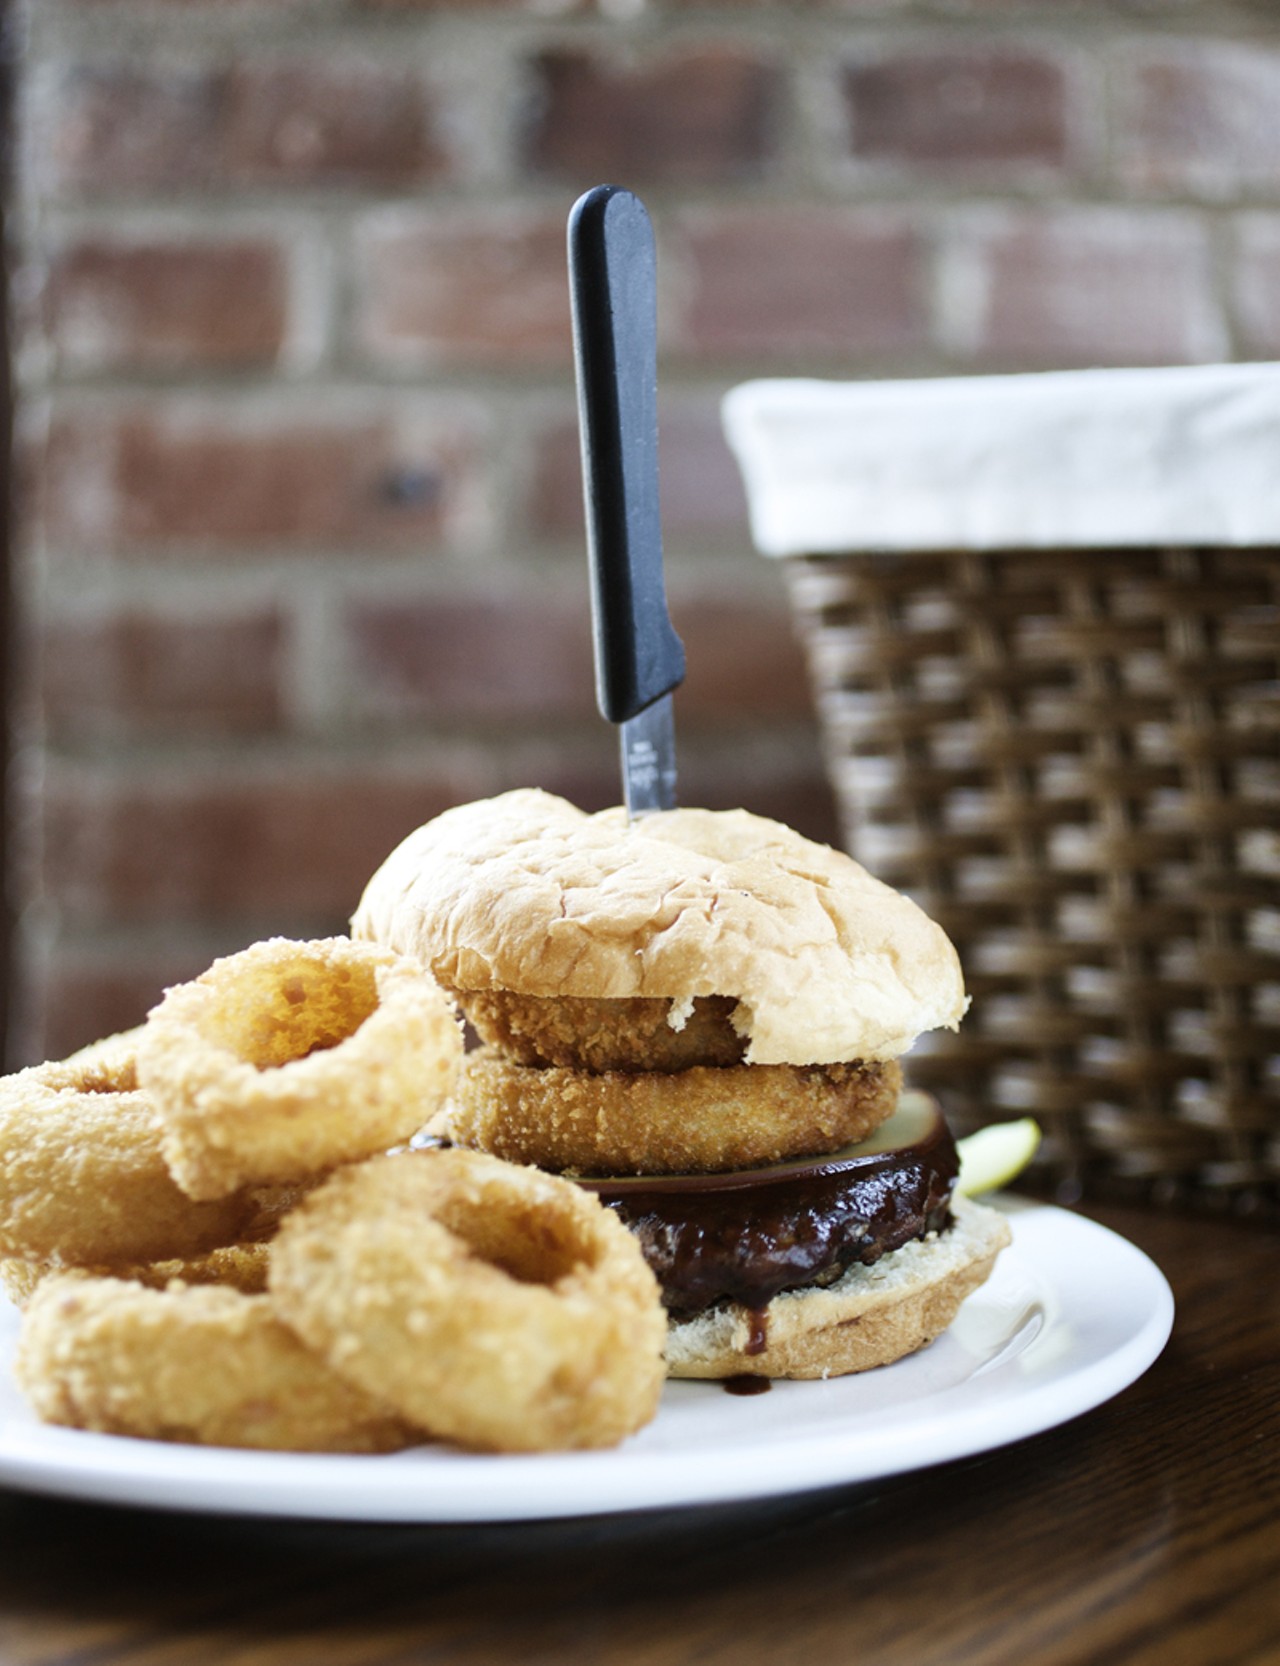 The One Eyed Jack Burger is stacked with onion rings, smoked Gouda, and their own Bourbon BBQ sauce.